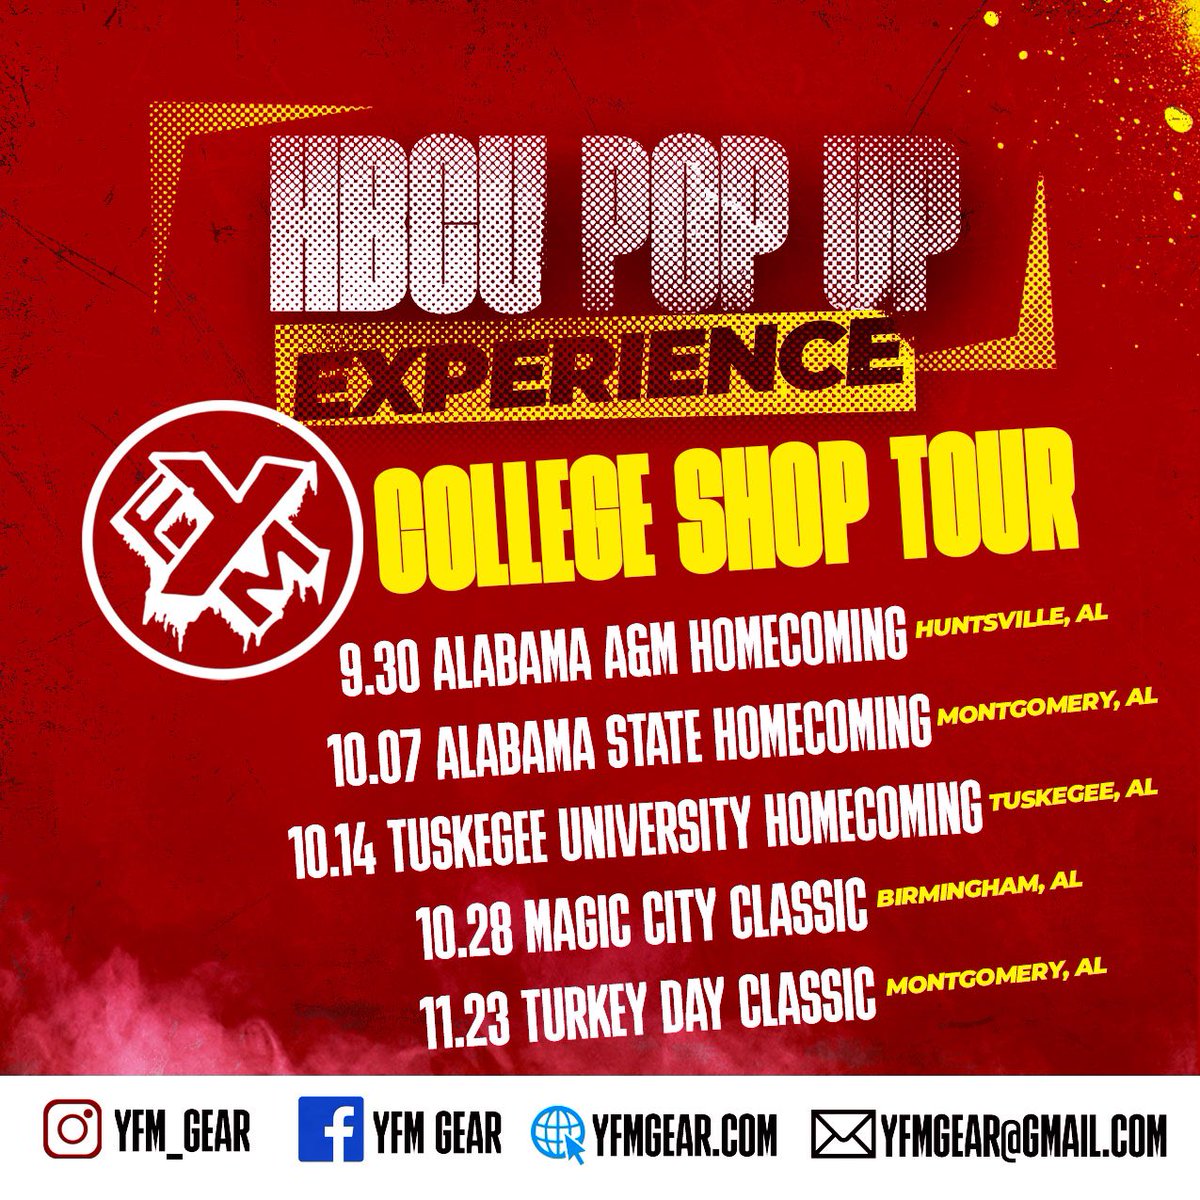 The official YFM HBCU College Tour is coming to a nearby HBCU. Join us at the YFM pop-up shop to support our brand, Ya Feel Me‼️💯 #HBCU #Alabama #alabamastateuniversity🐝 #AAMU #myASU #explorepage #AAMU23 #tuskegee #tuskegeeuniversity #tu #hbcugrad